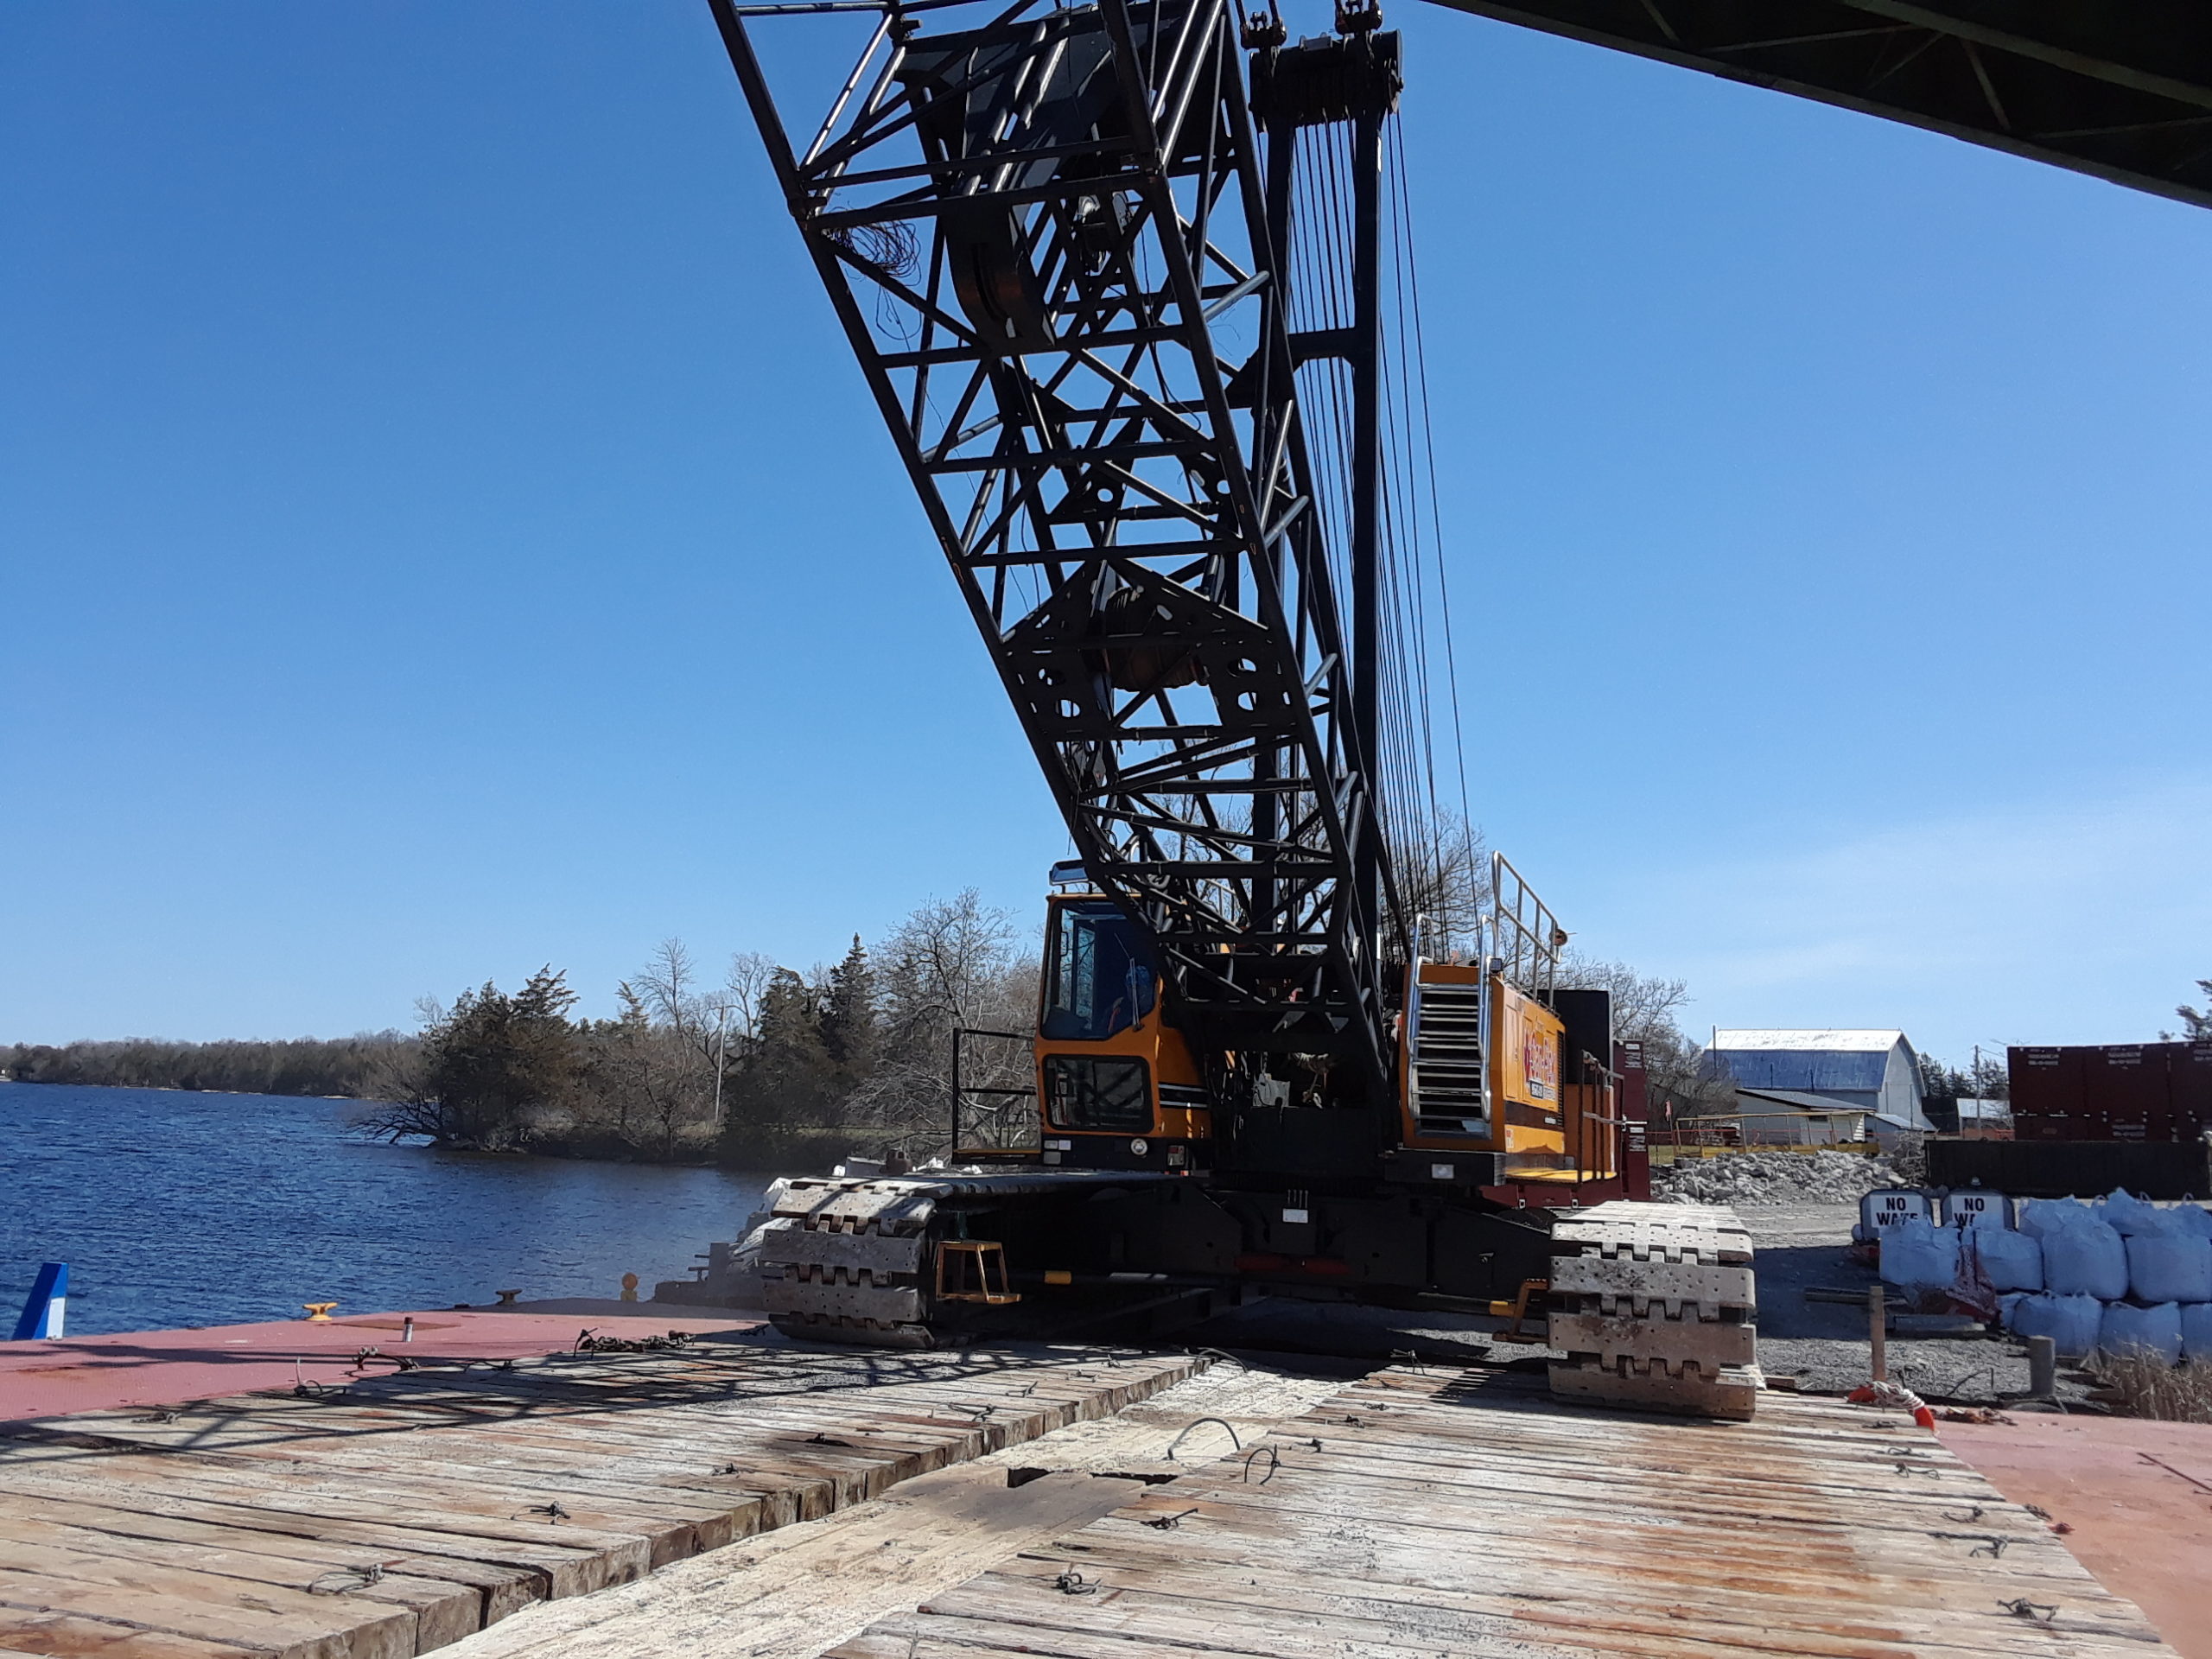 Second 200 ton crane being loaded onto a barge